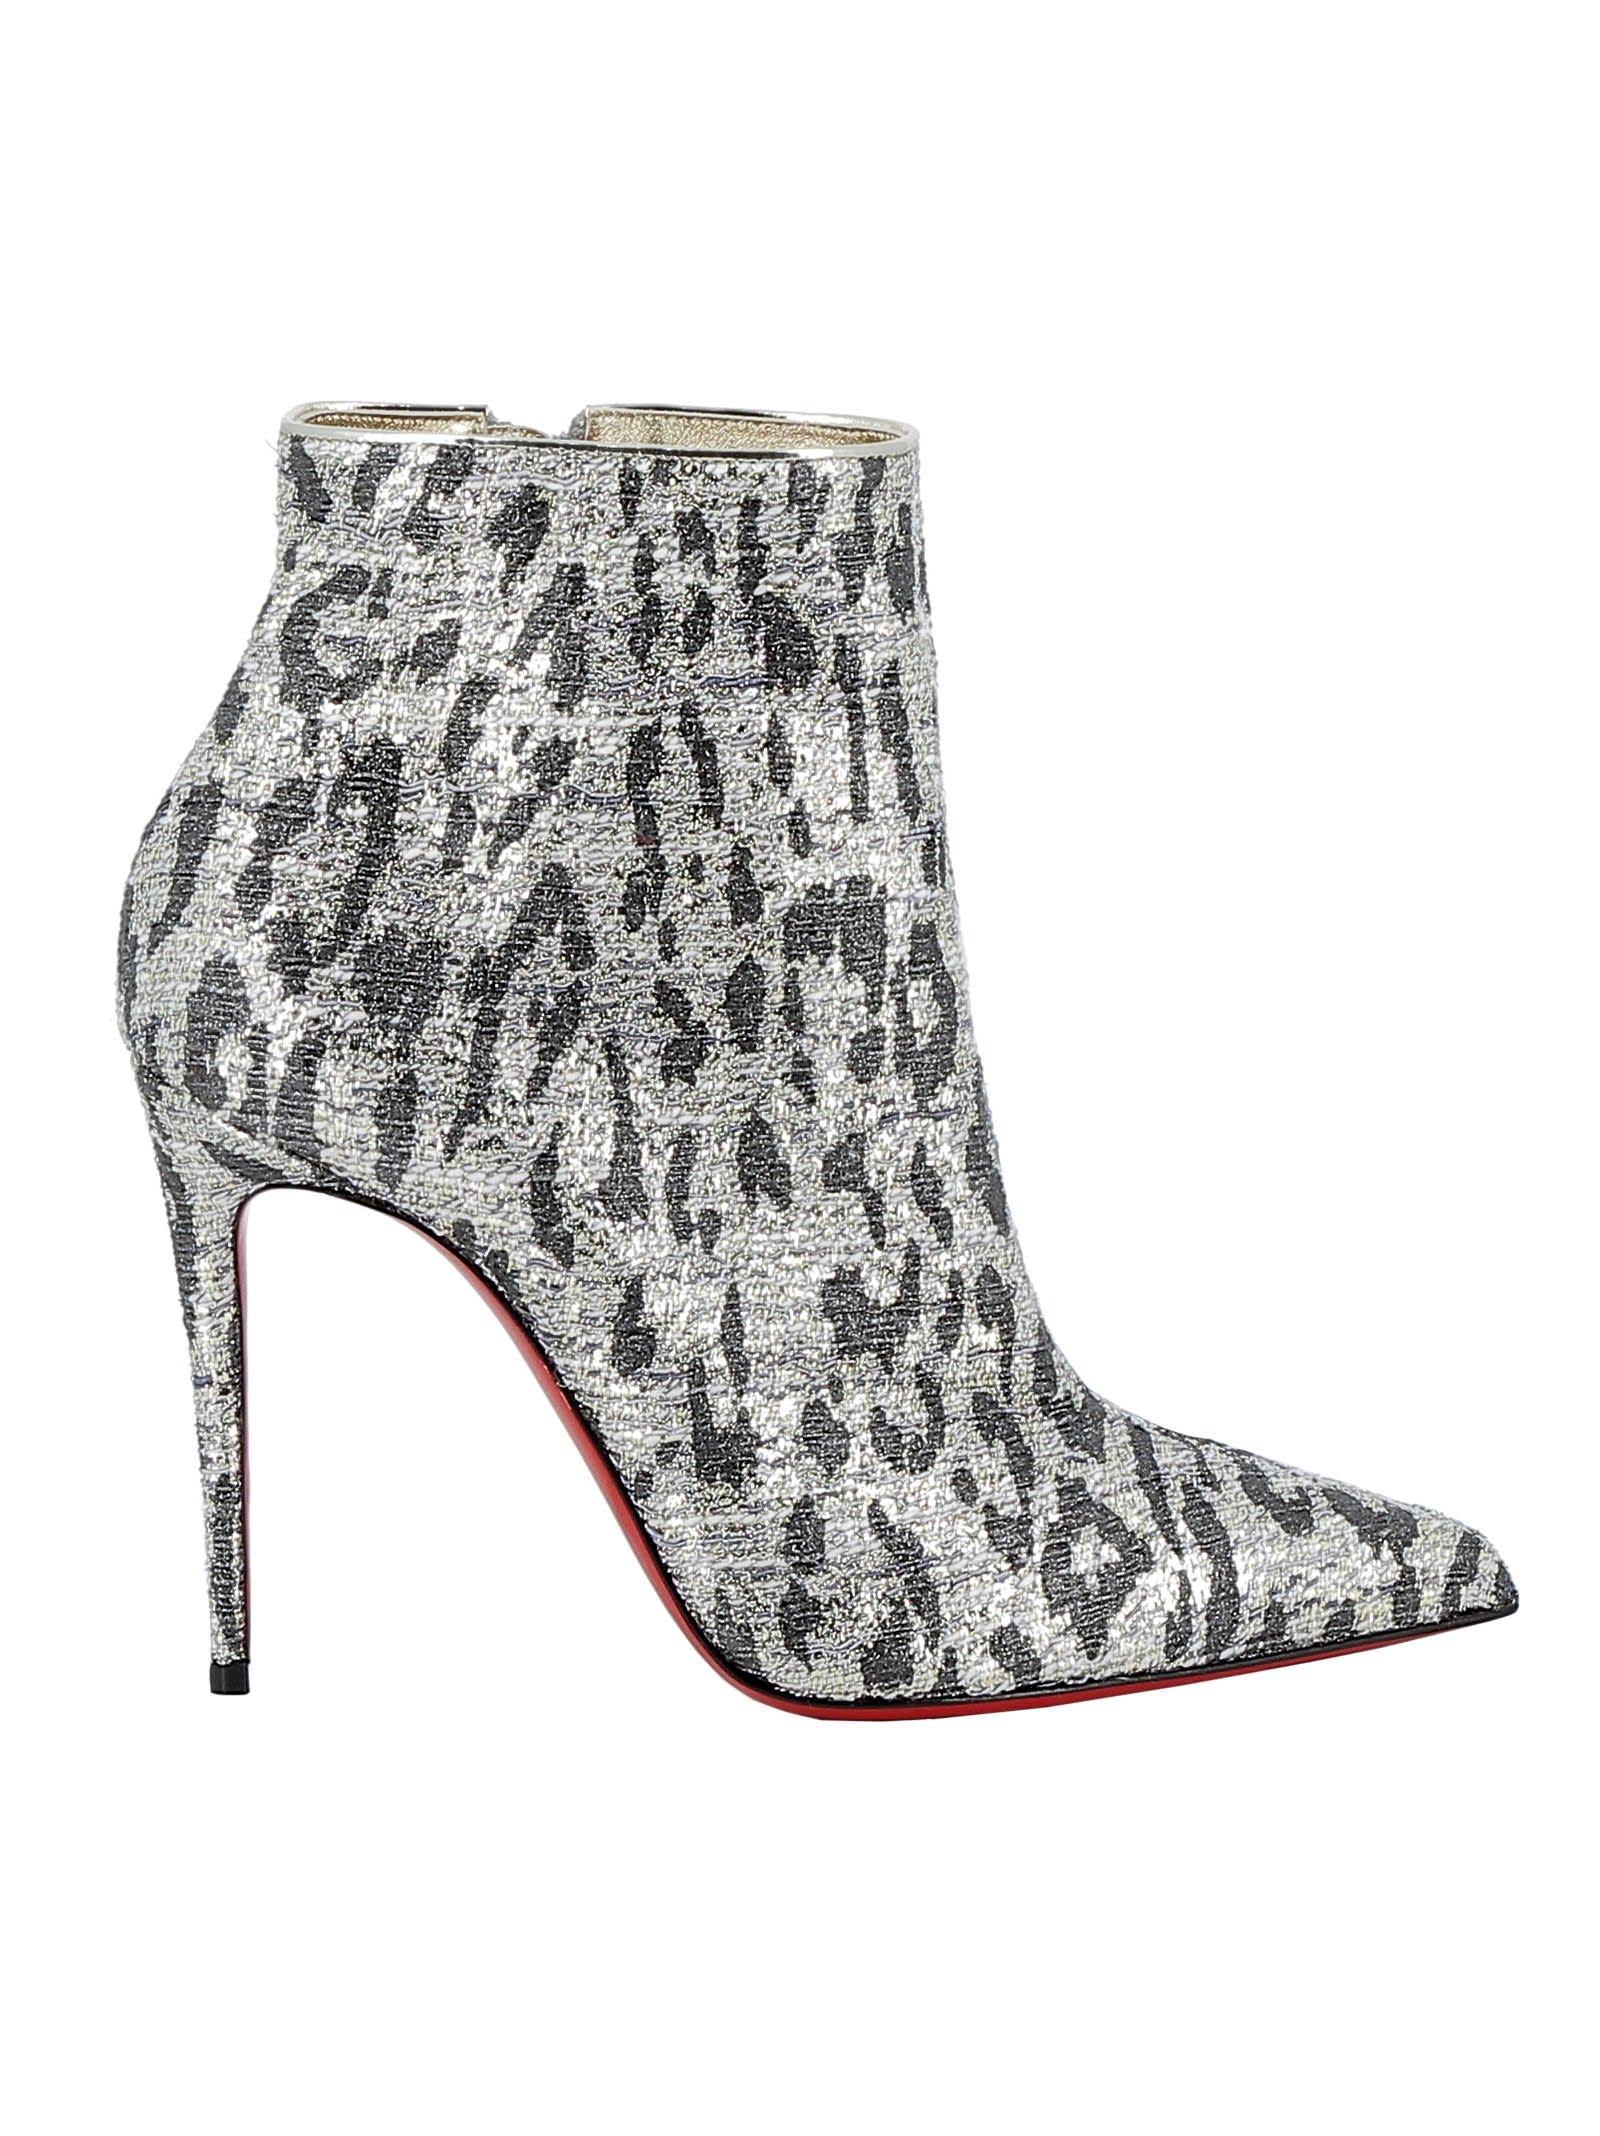 louboutin silver boots